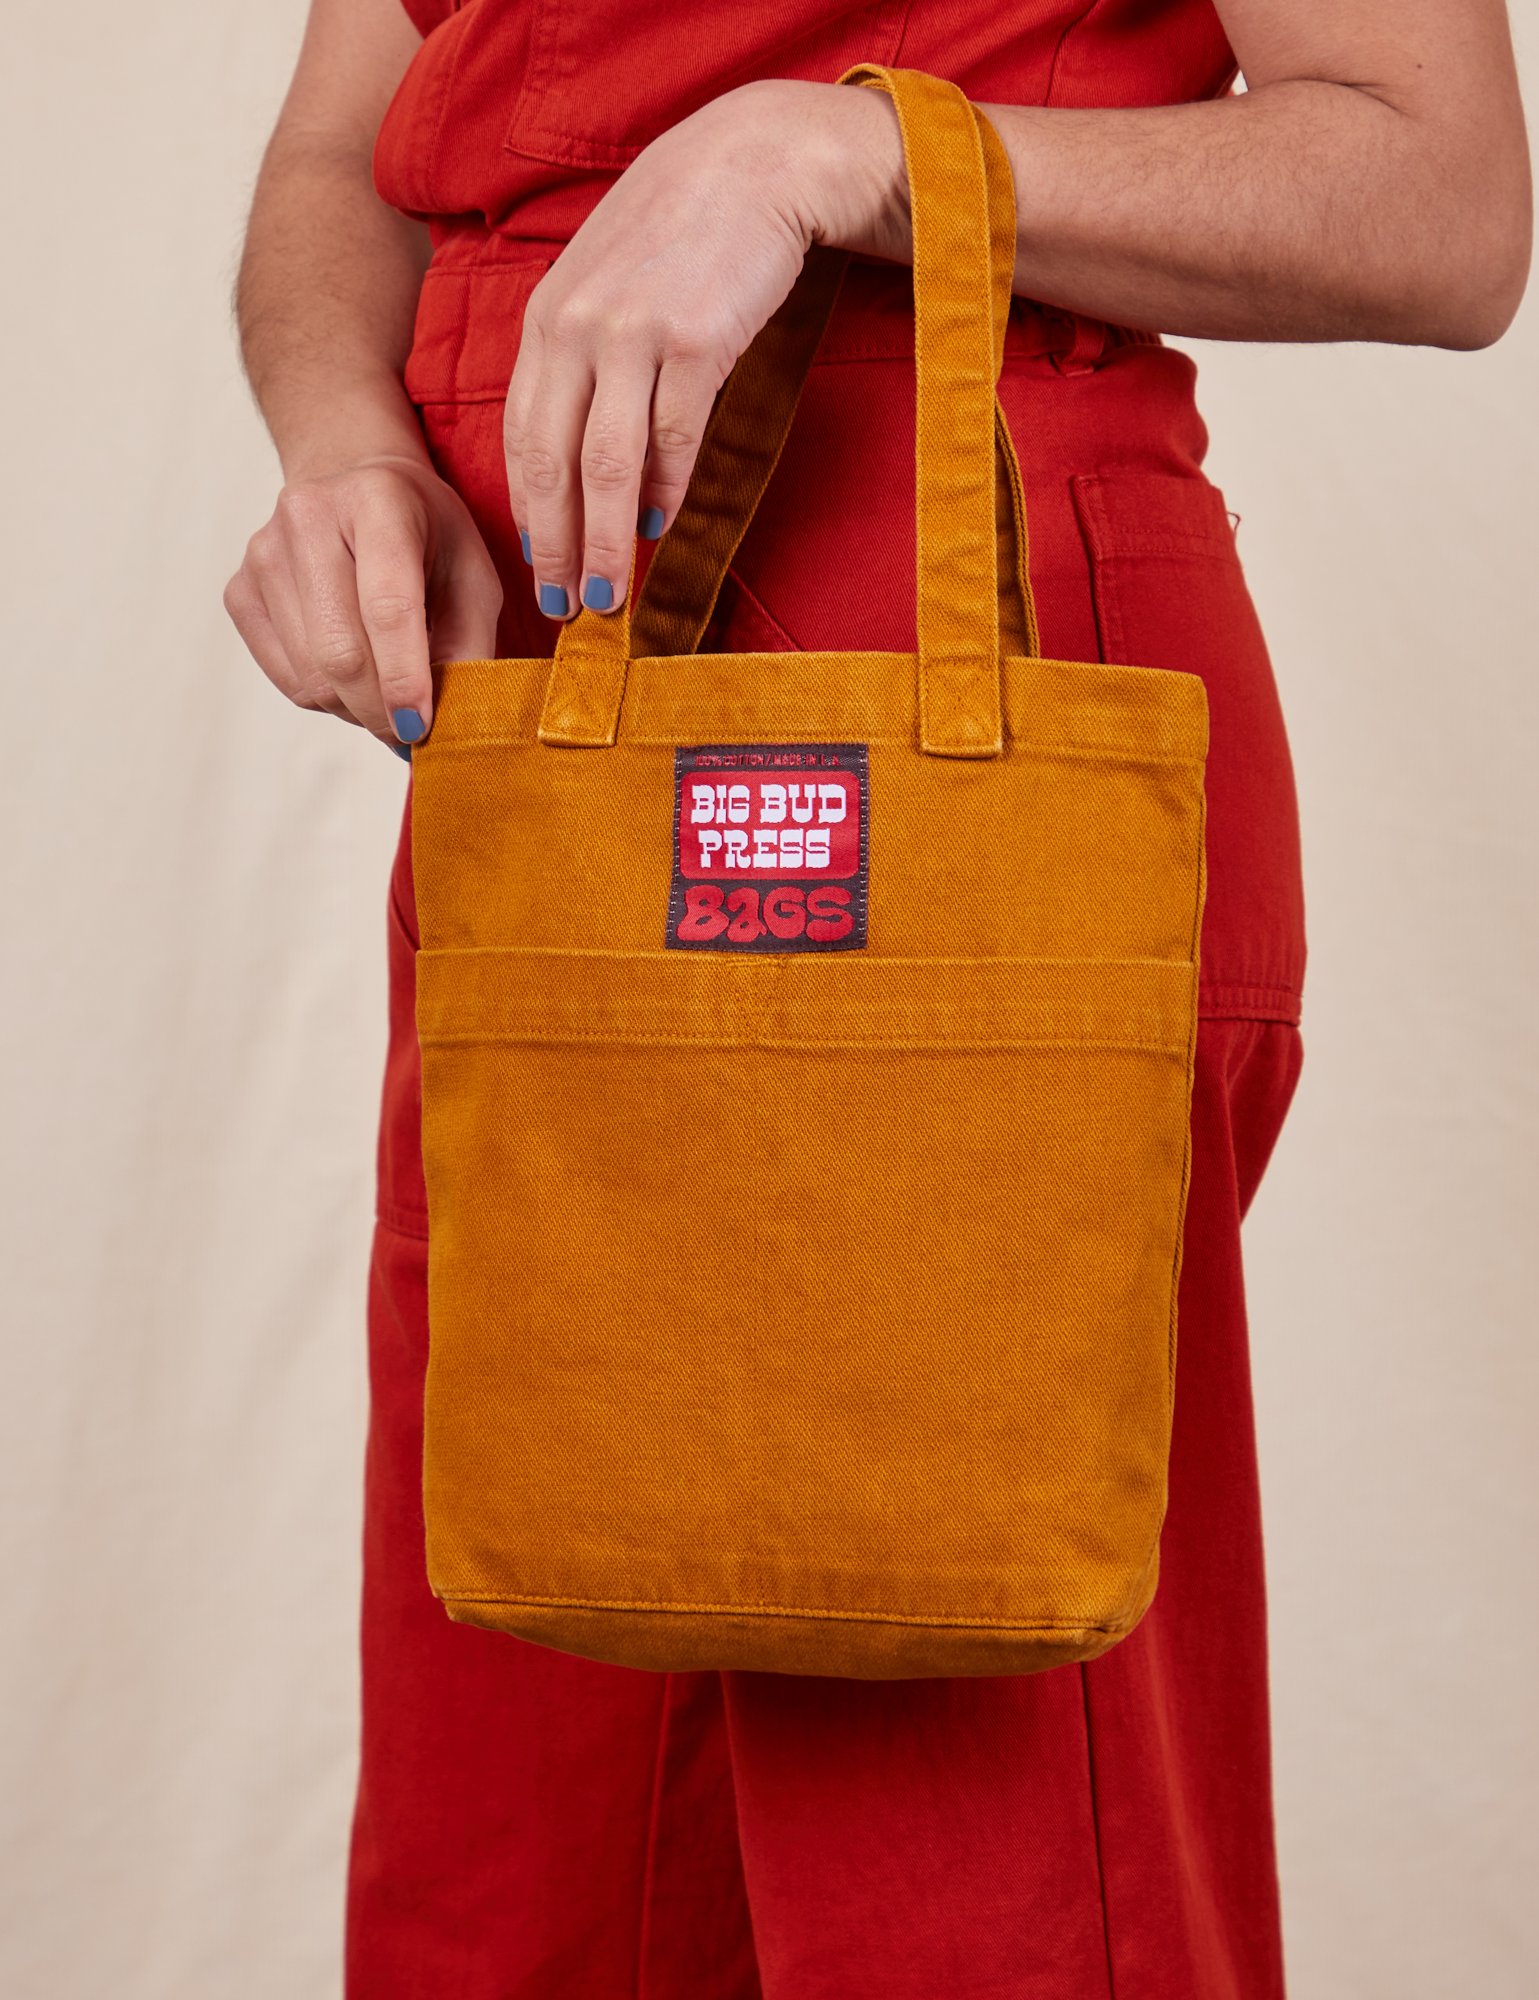 Mini Tote Bags in Spicy Mustard